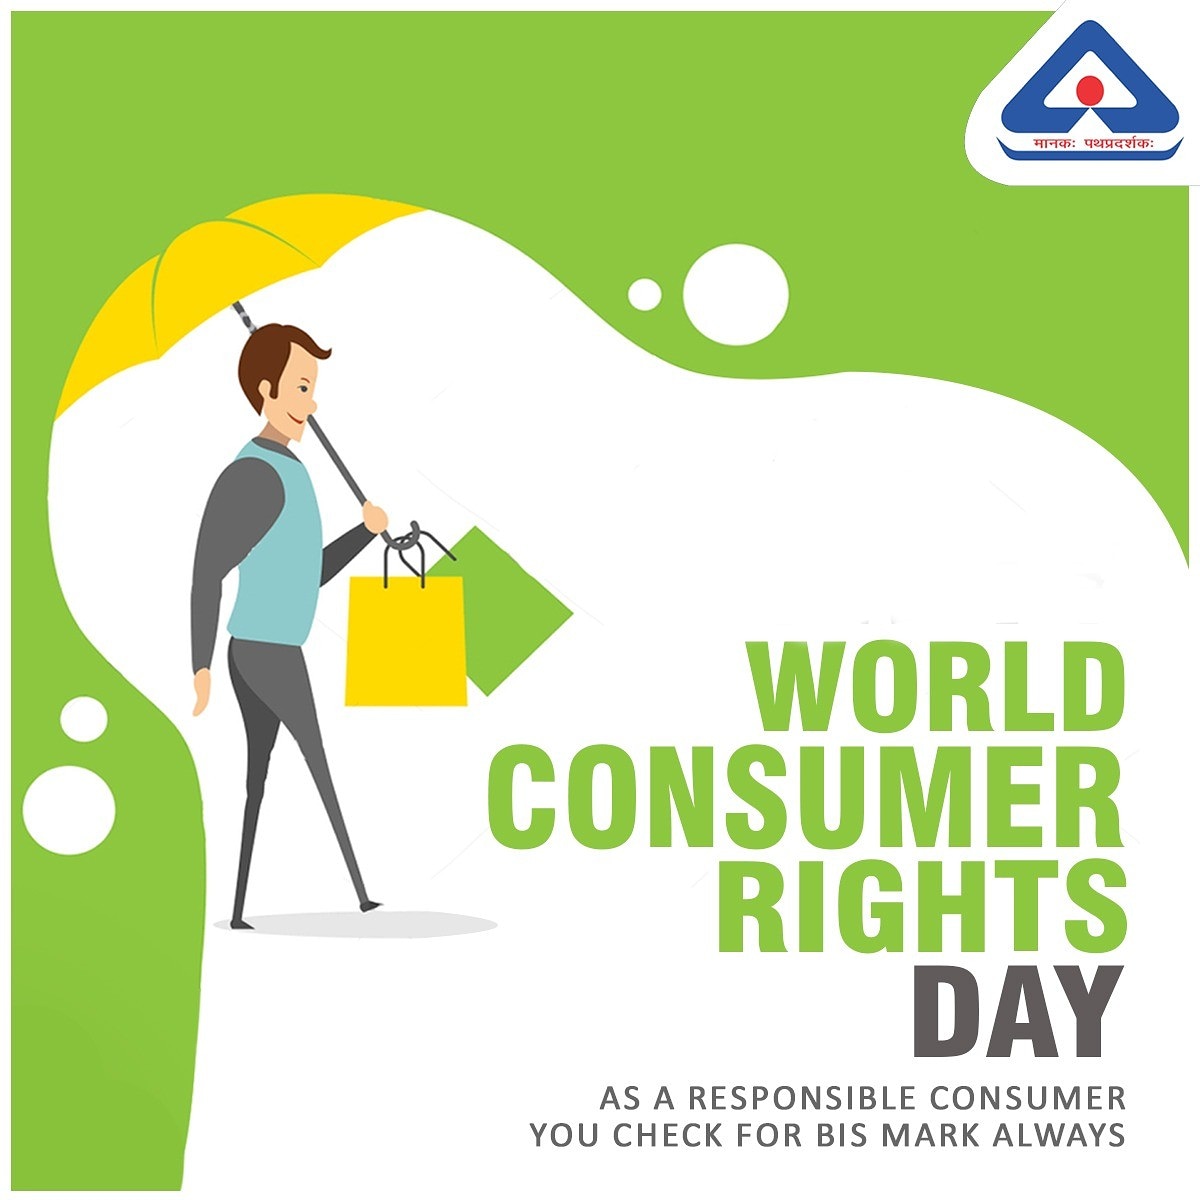 #WorldConsumerRightsDay is celebrated on 15 March as a means of raising global awareness about consumer rights and needs.We all join BIS Ahmedabad in celebrating WCRD-24 and look forward to work together towards Protection of Consumer Rights and Empowerment.
#ISIMarkAlways